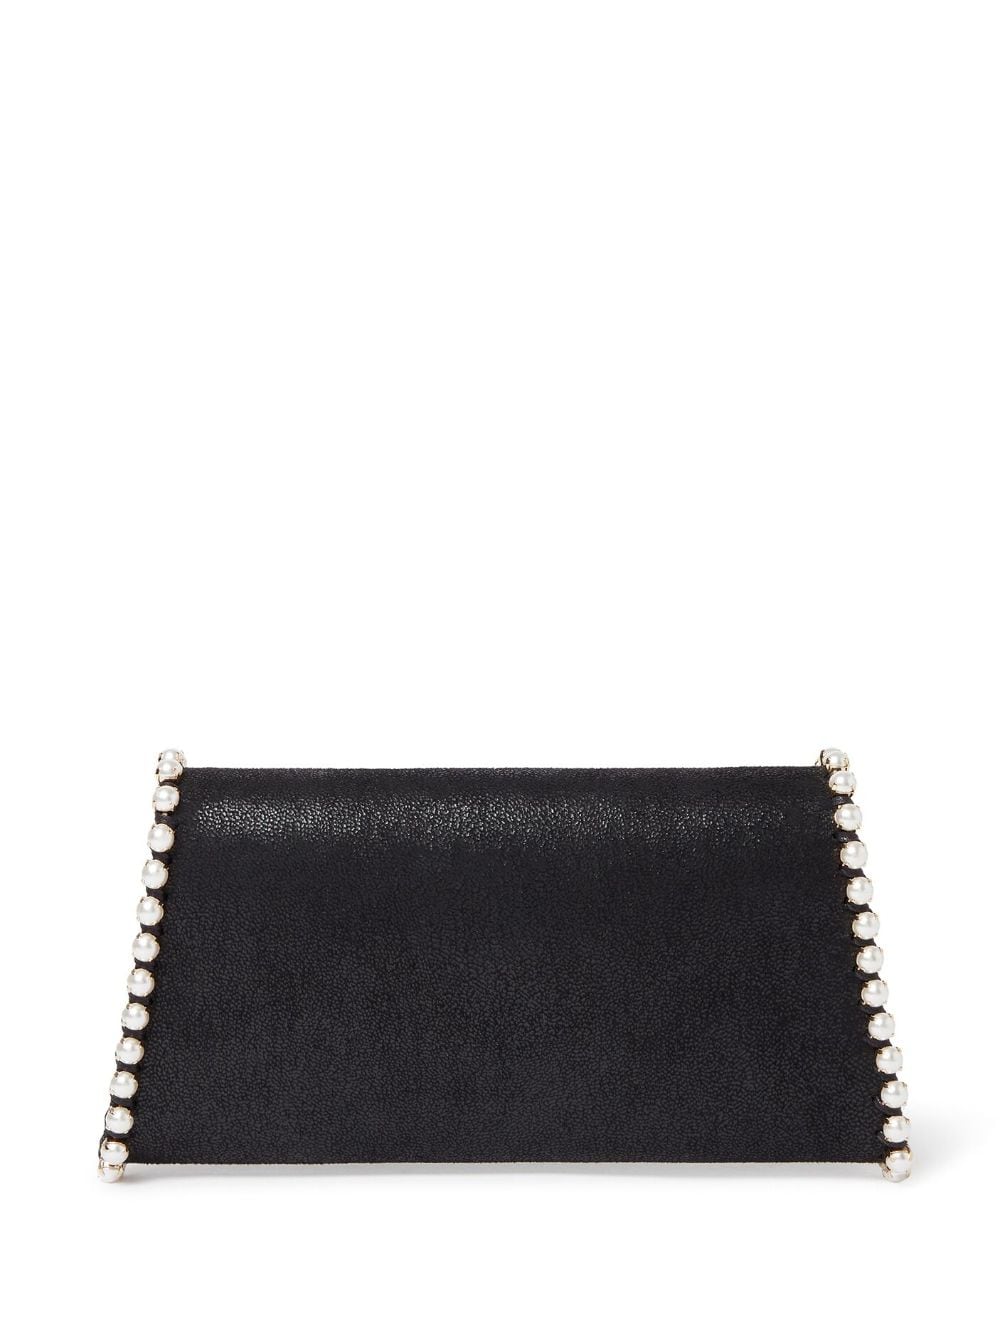 Stella-Mccartney-Pouch-Shaggy-Deer-With-Pearl-Chain-Black-2